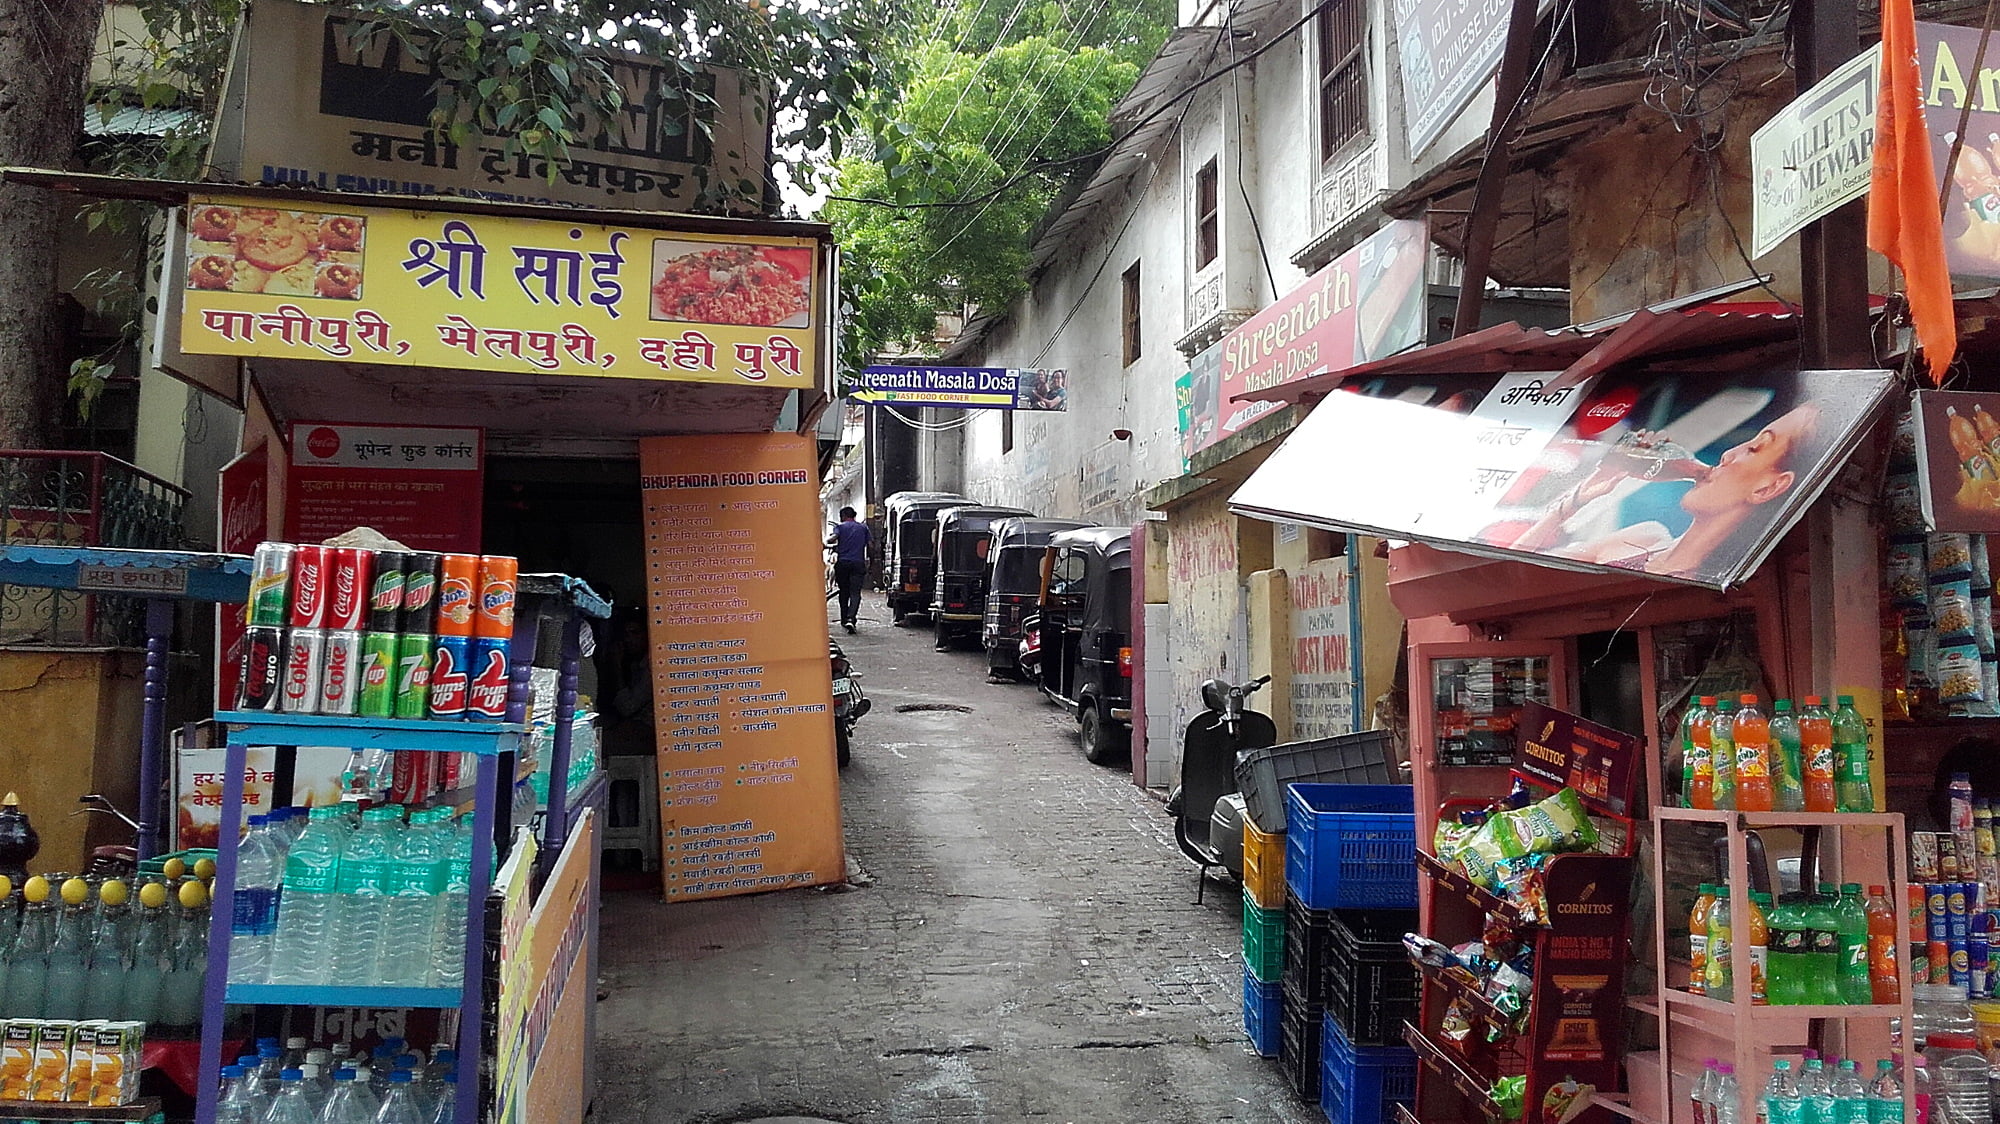 My noble mission in Udaipur led me to a narrow alley close to the City Fort.